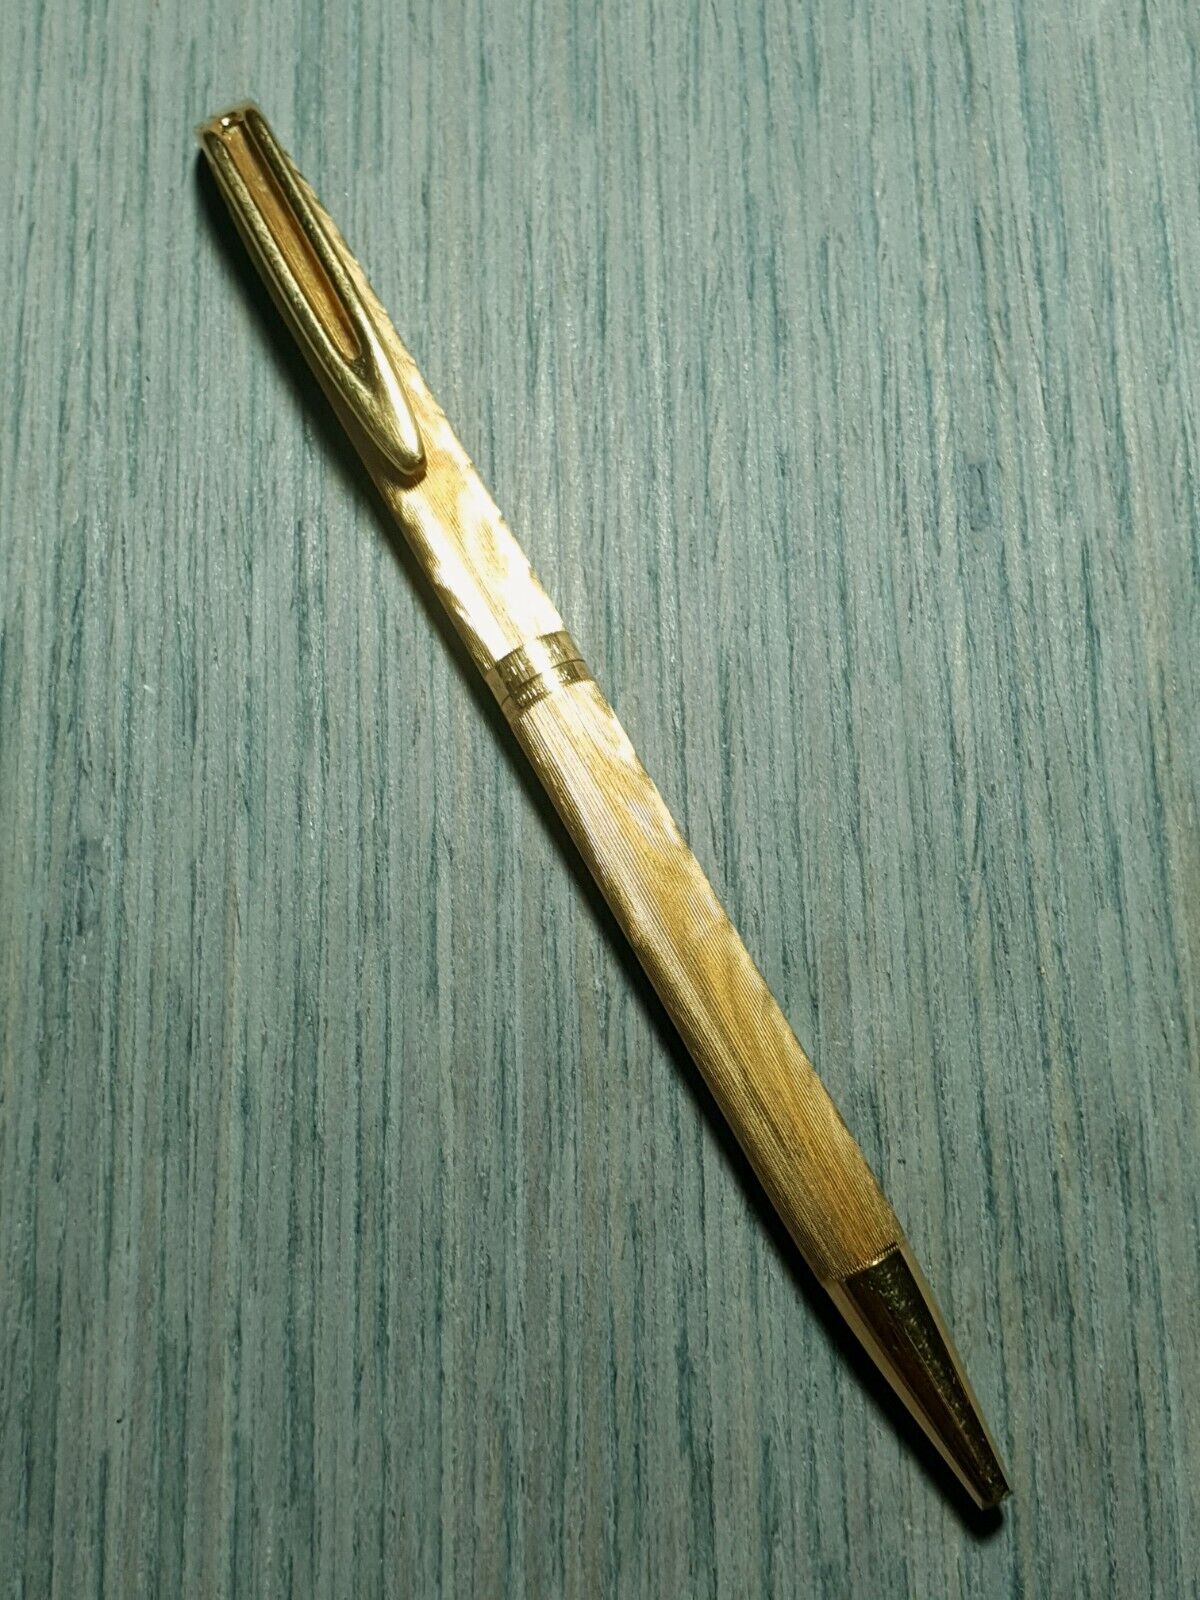 RARE VINTAGE WATERMAN CF PLAQUE OR G FINE LINED BALLPOINT PEN-FRANCE MADE